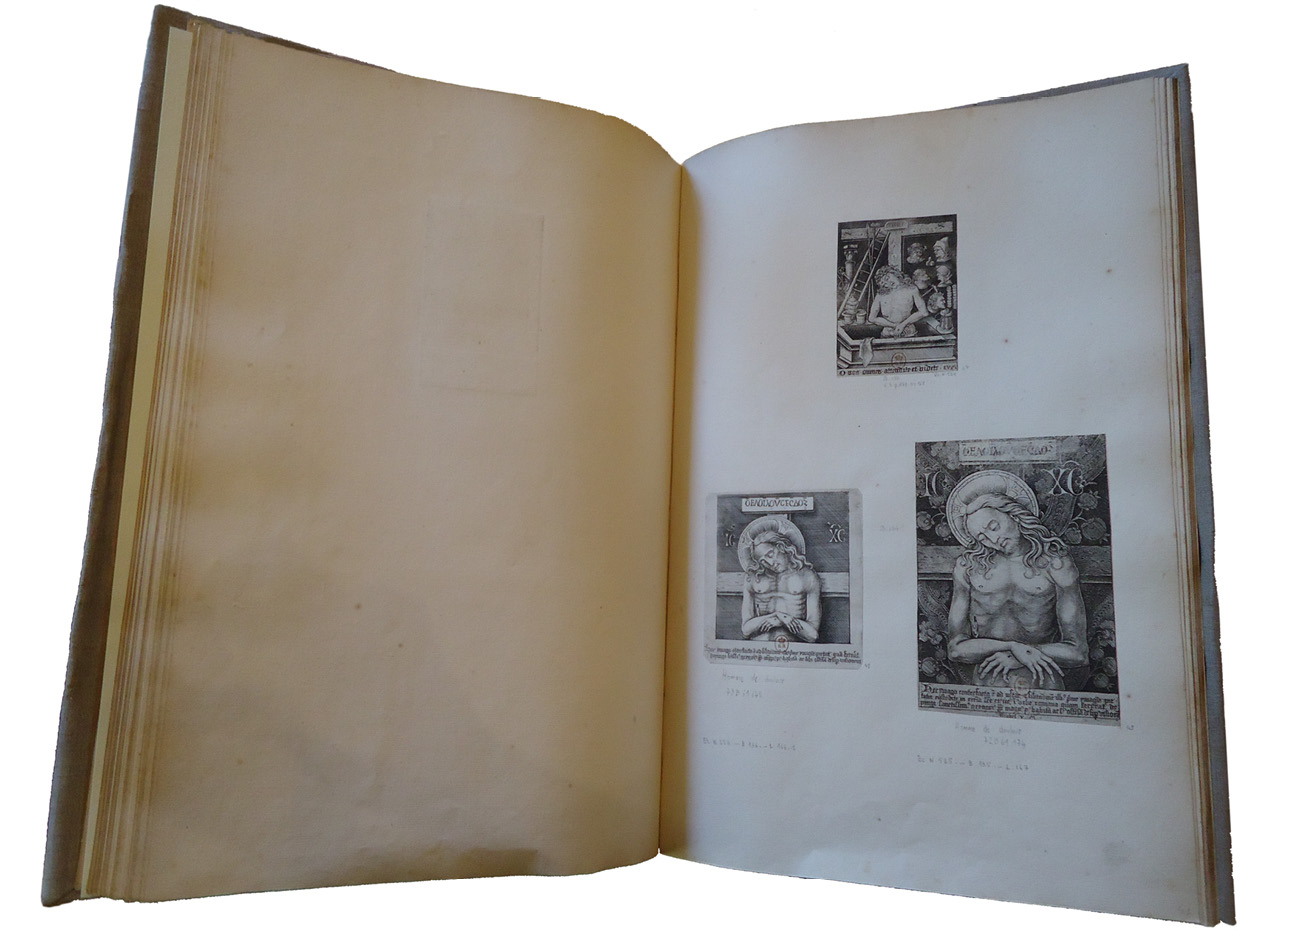 Fig. 60  Album from Paris, BnF, Département des Estampes, with three engravings by Israhel van Meckenem representing Christ as the Man of Sorrows. Published with kind permission from the Bibliothèque nationale de France.